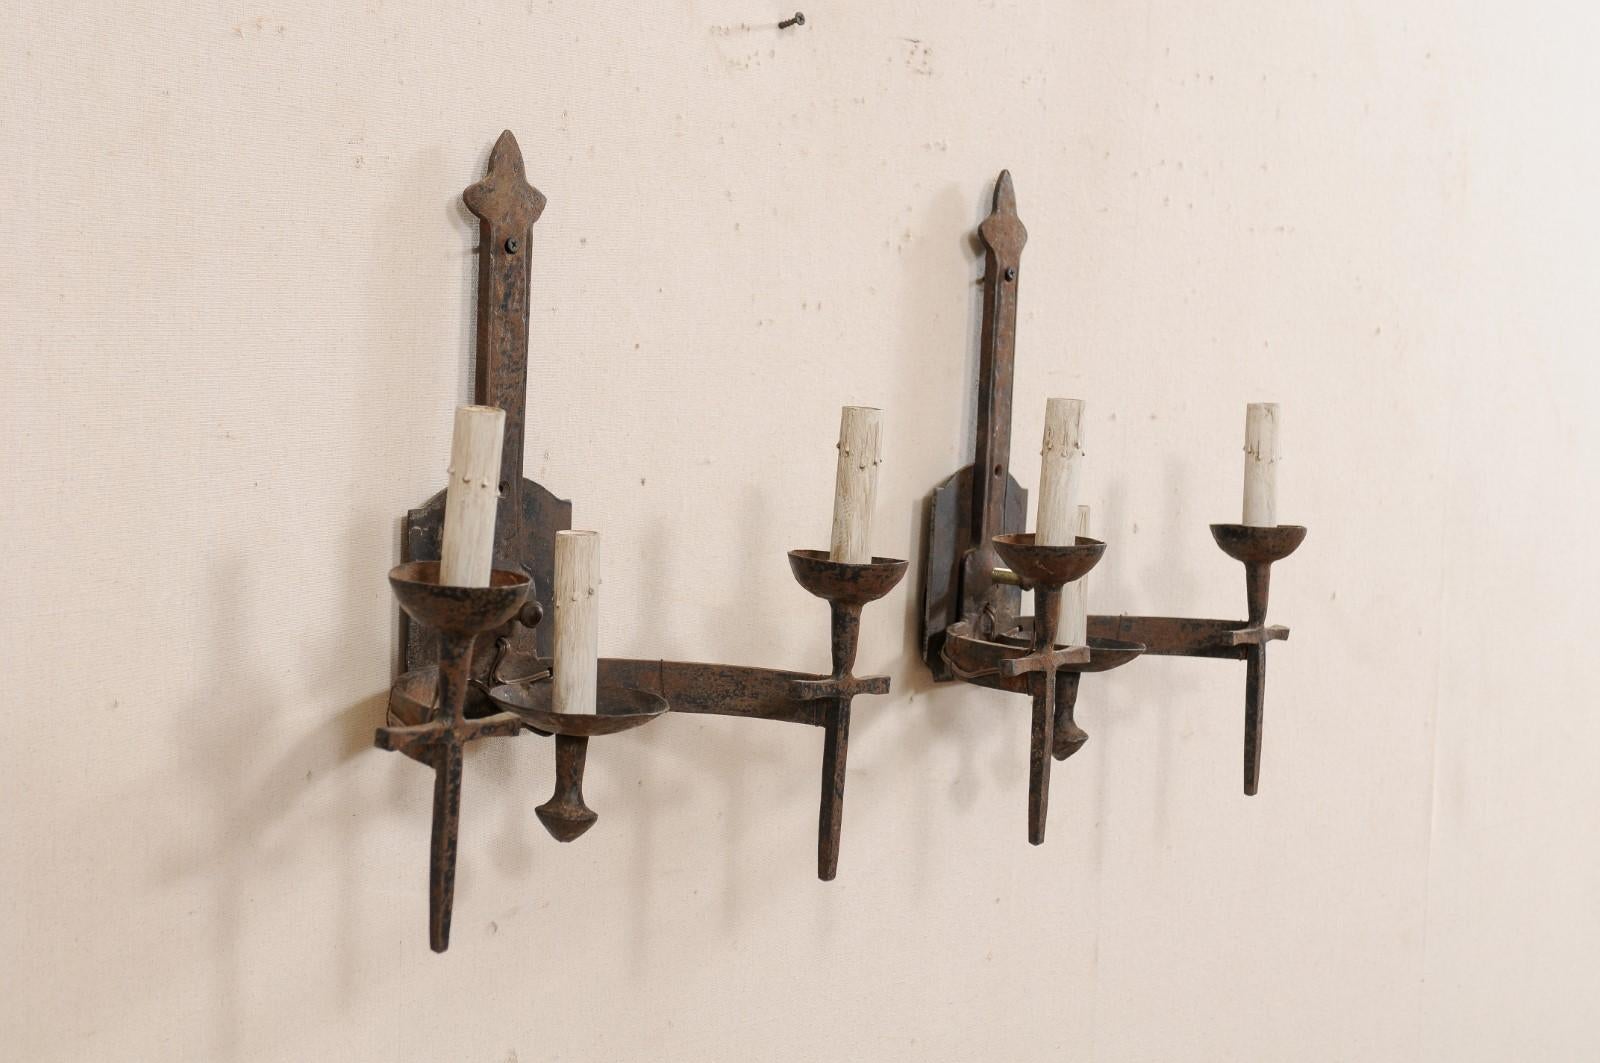 Forged Pair of French Three-Light Midcentury Torch-Style Iron Sconces For Sale